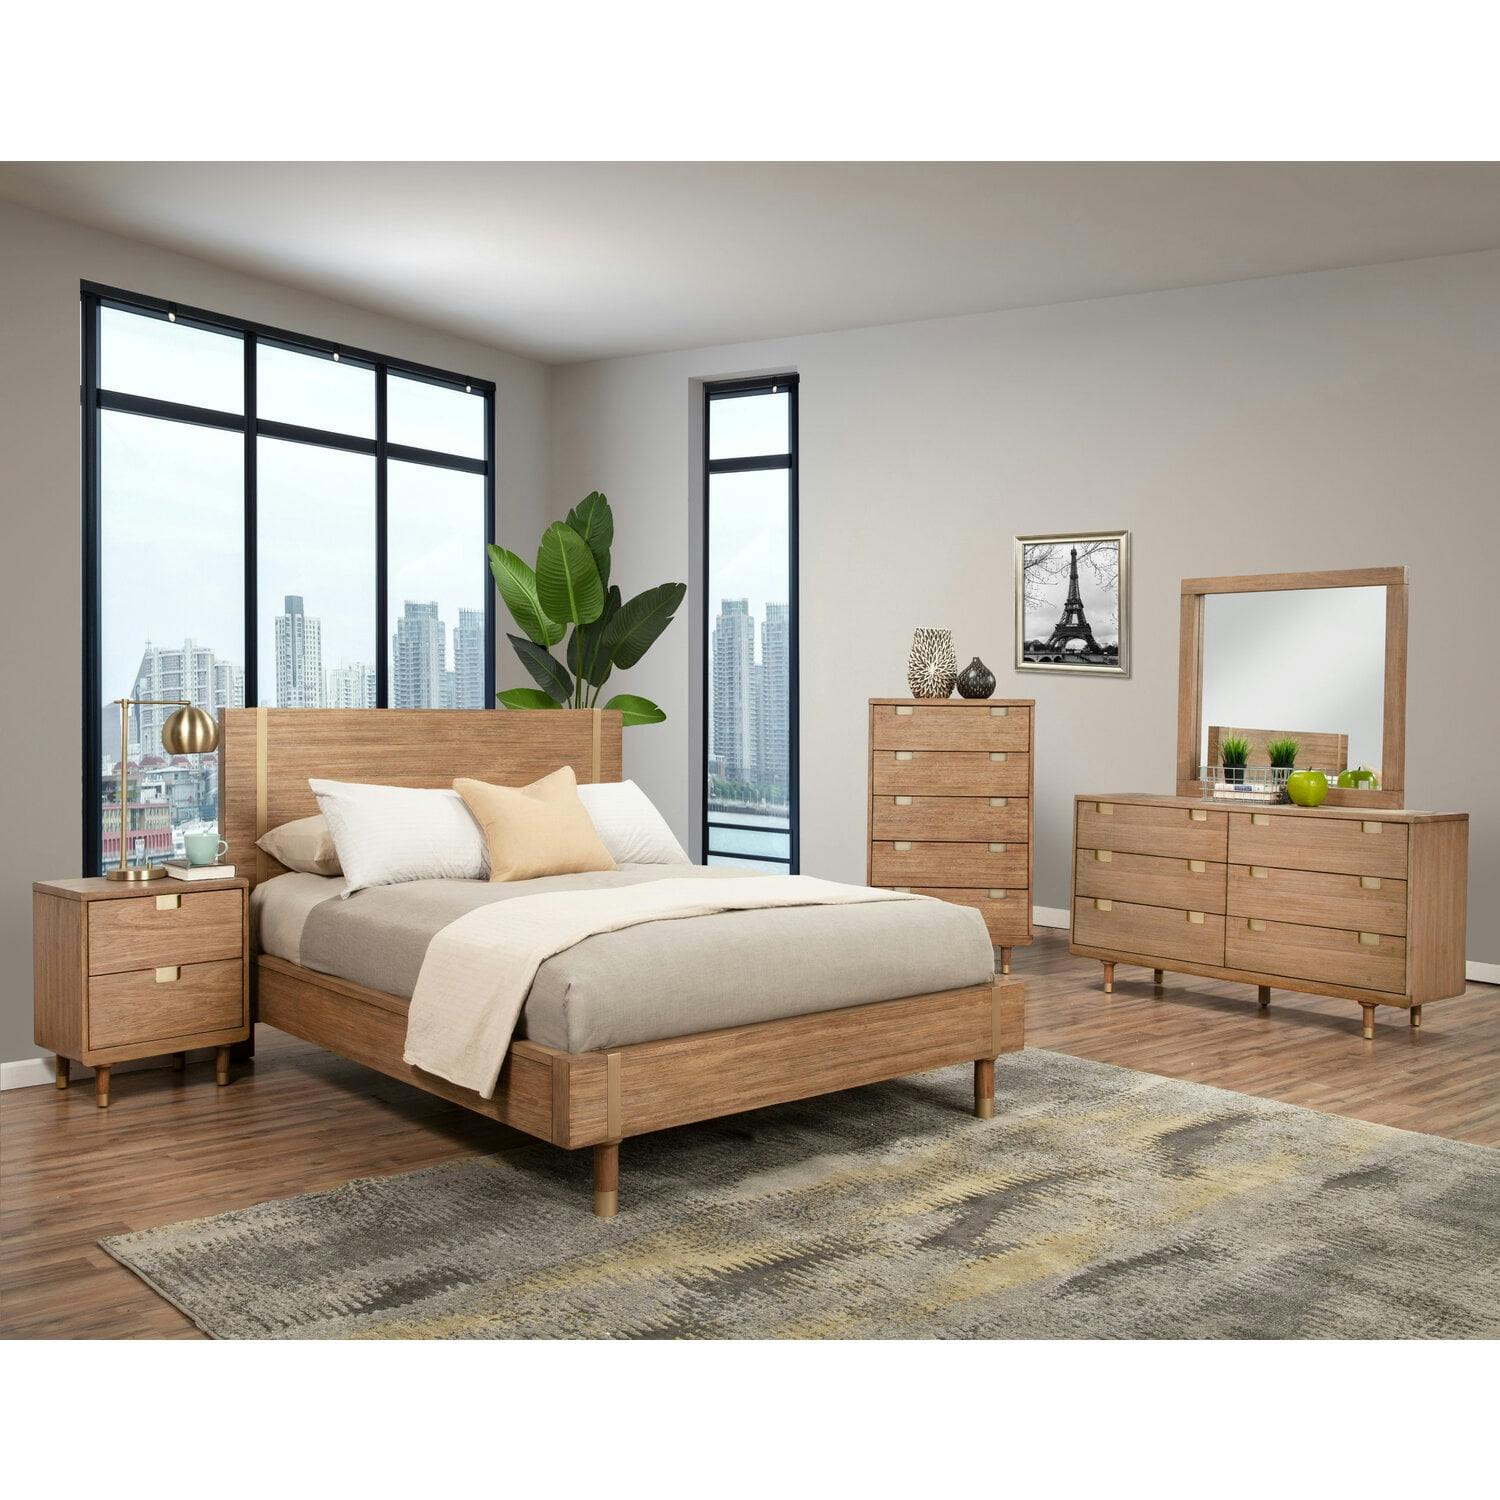 Easton Transitional Full Platform Bed with Slats in Sand Finish